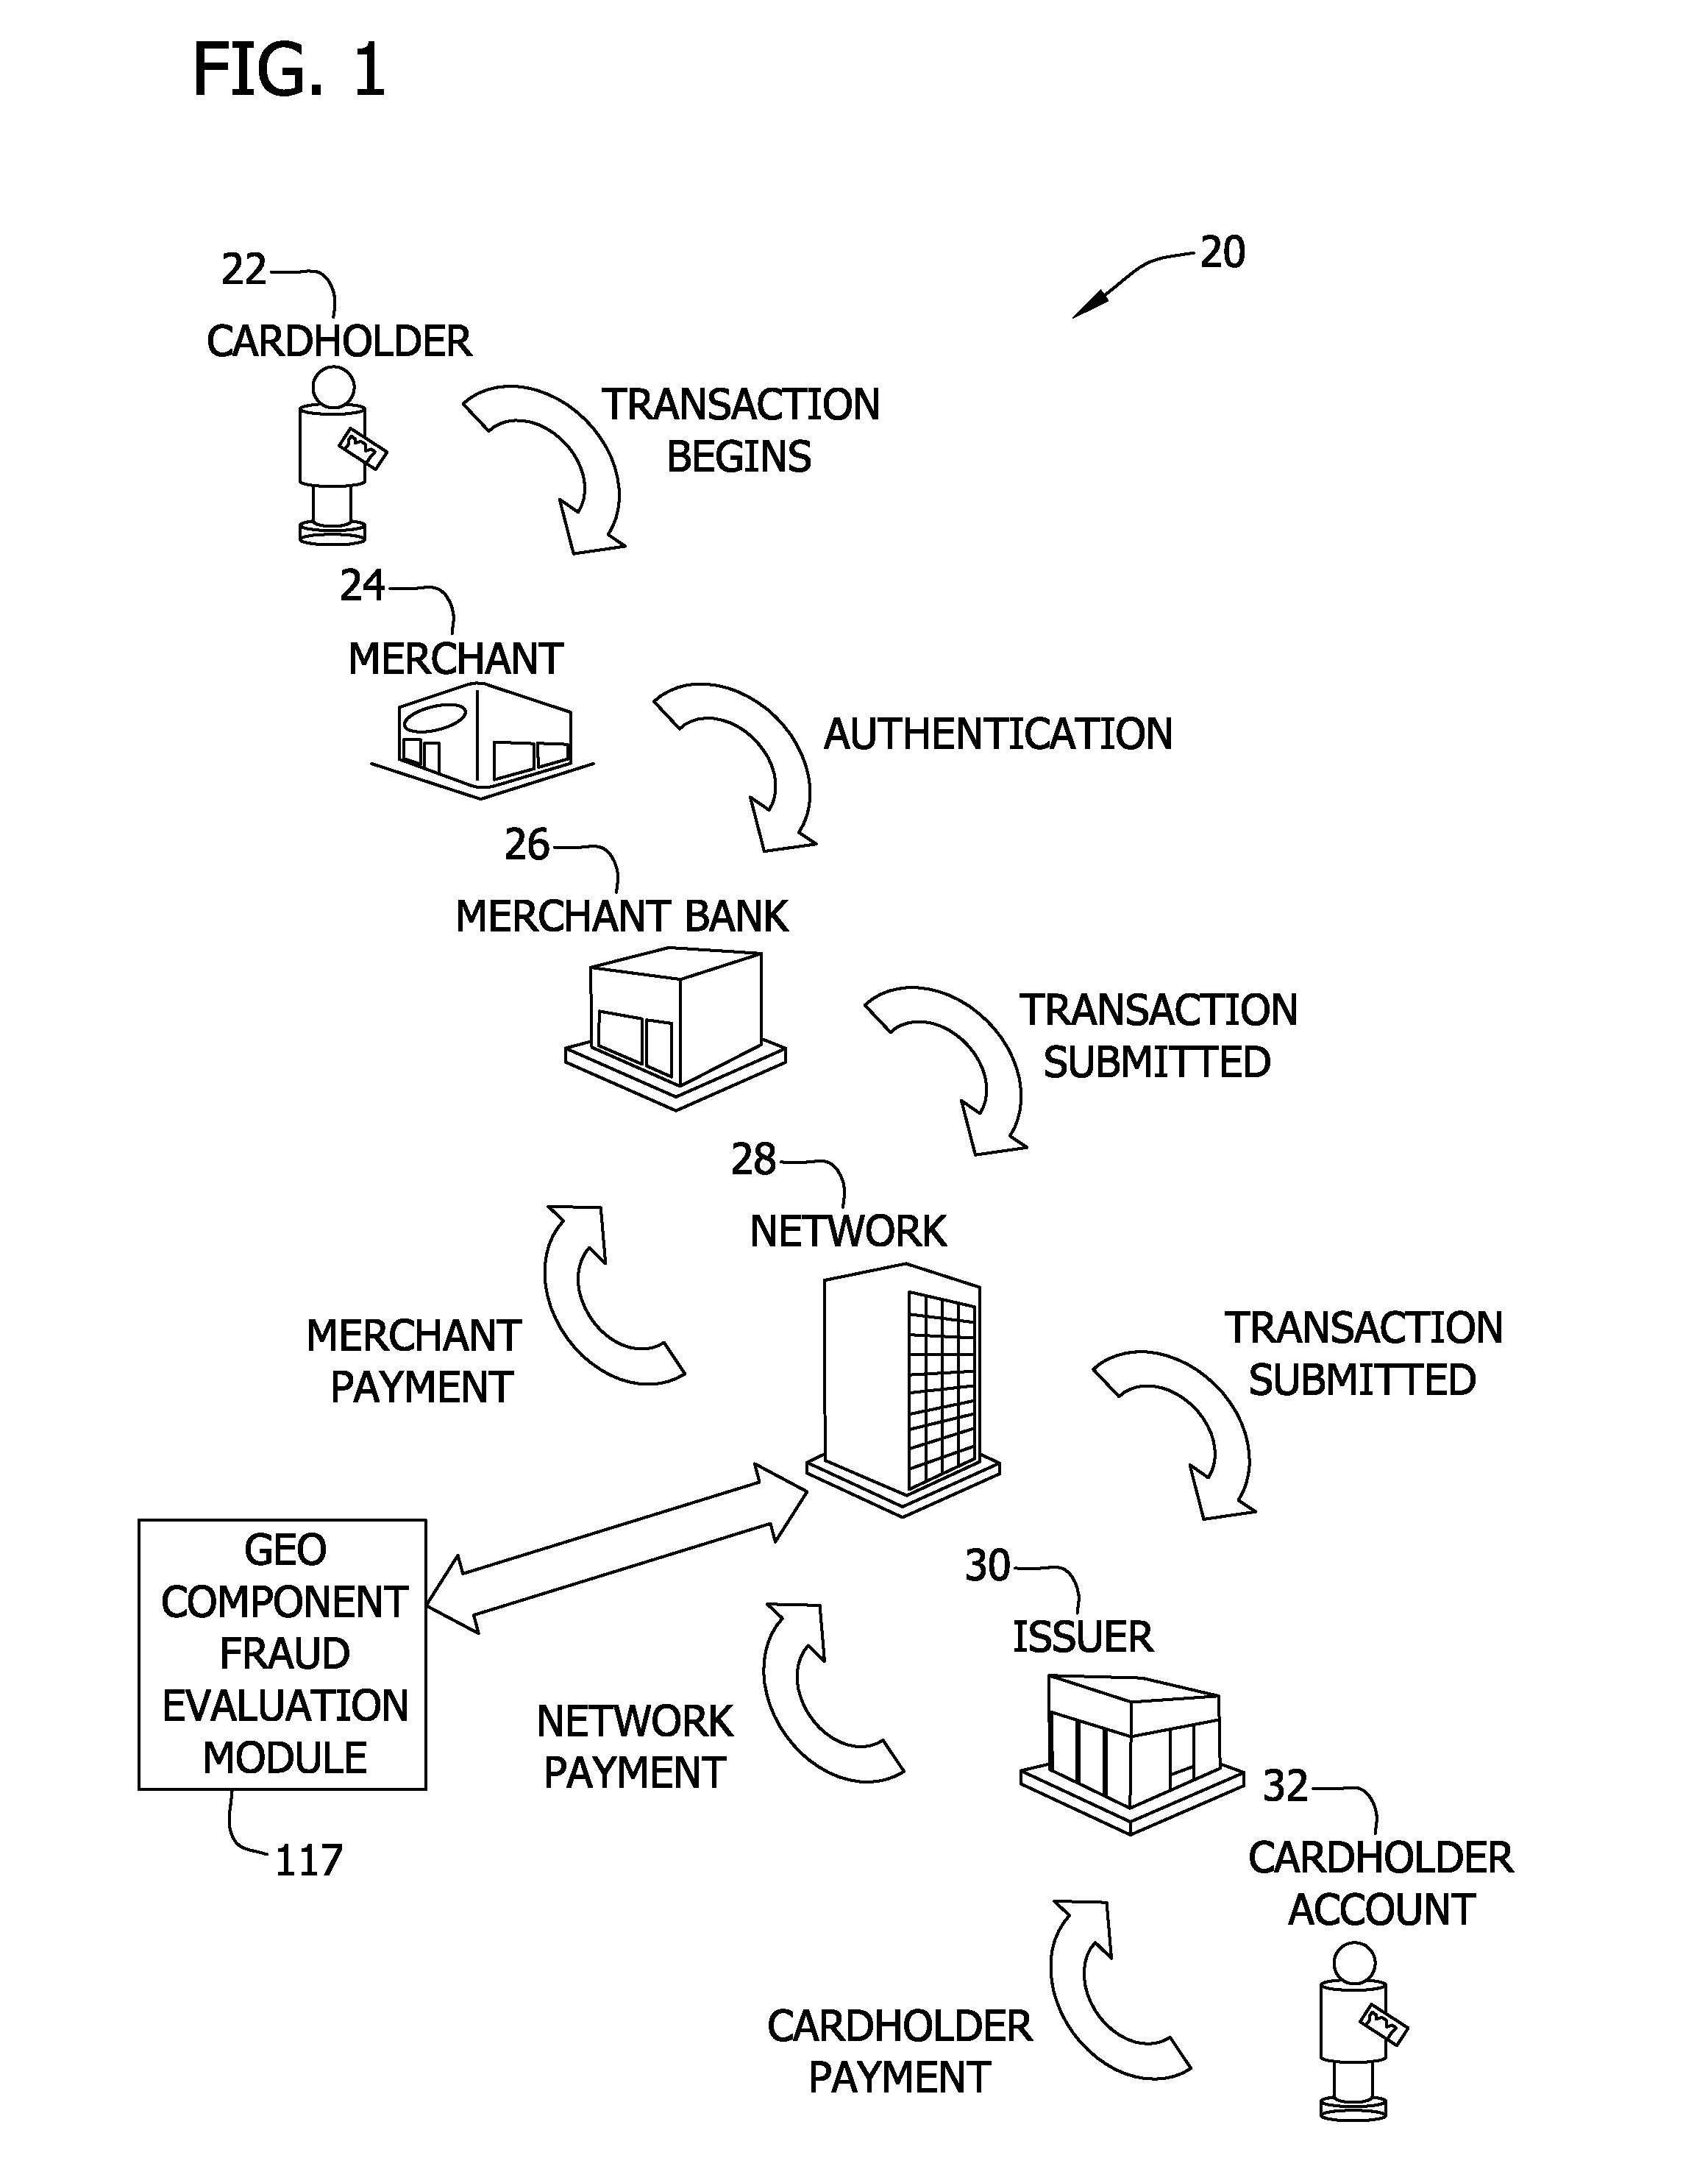 Systems and methods for geo component fraud detection for card-present transactions